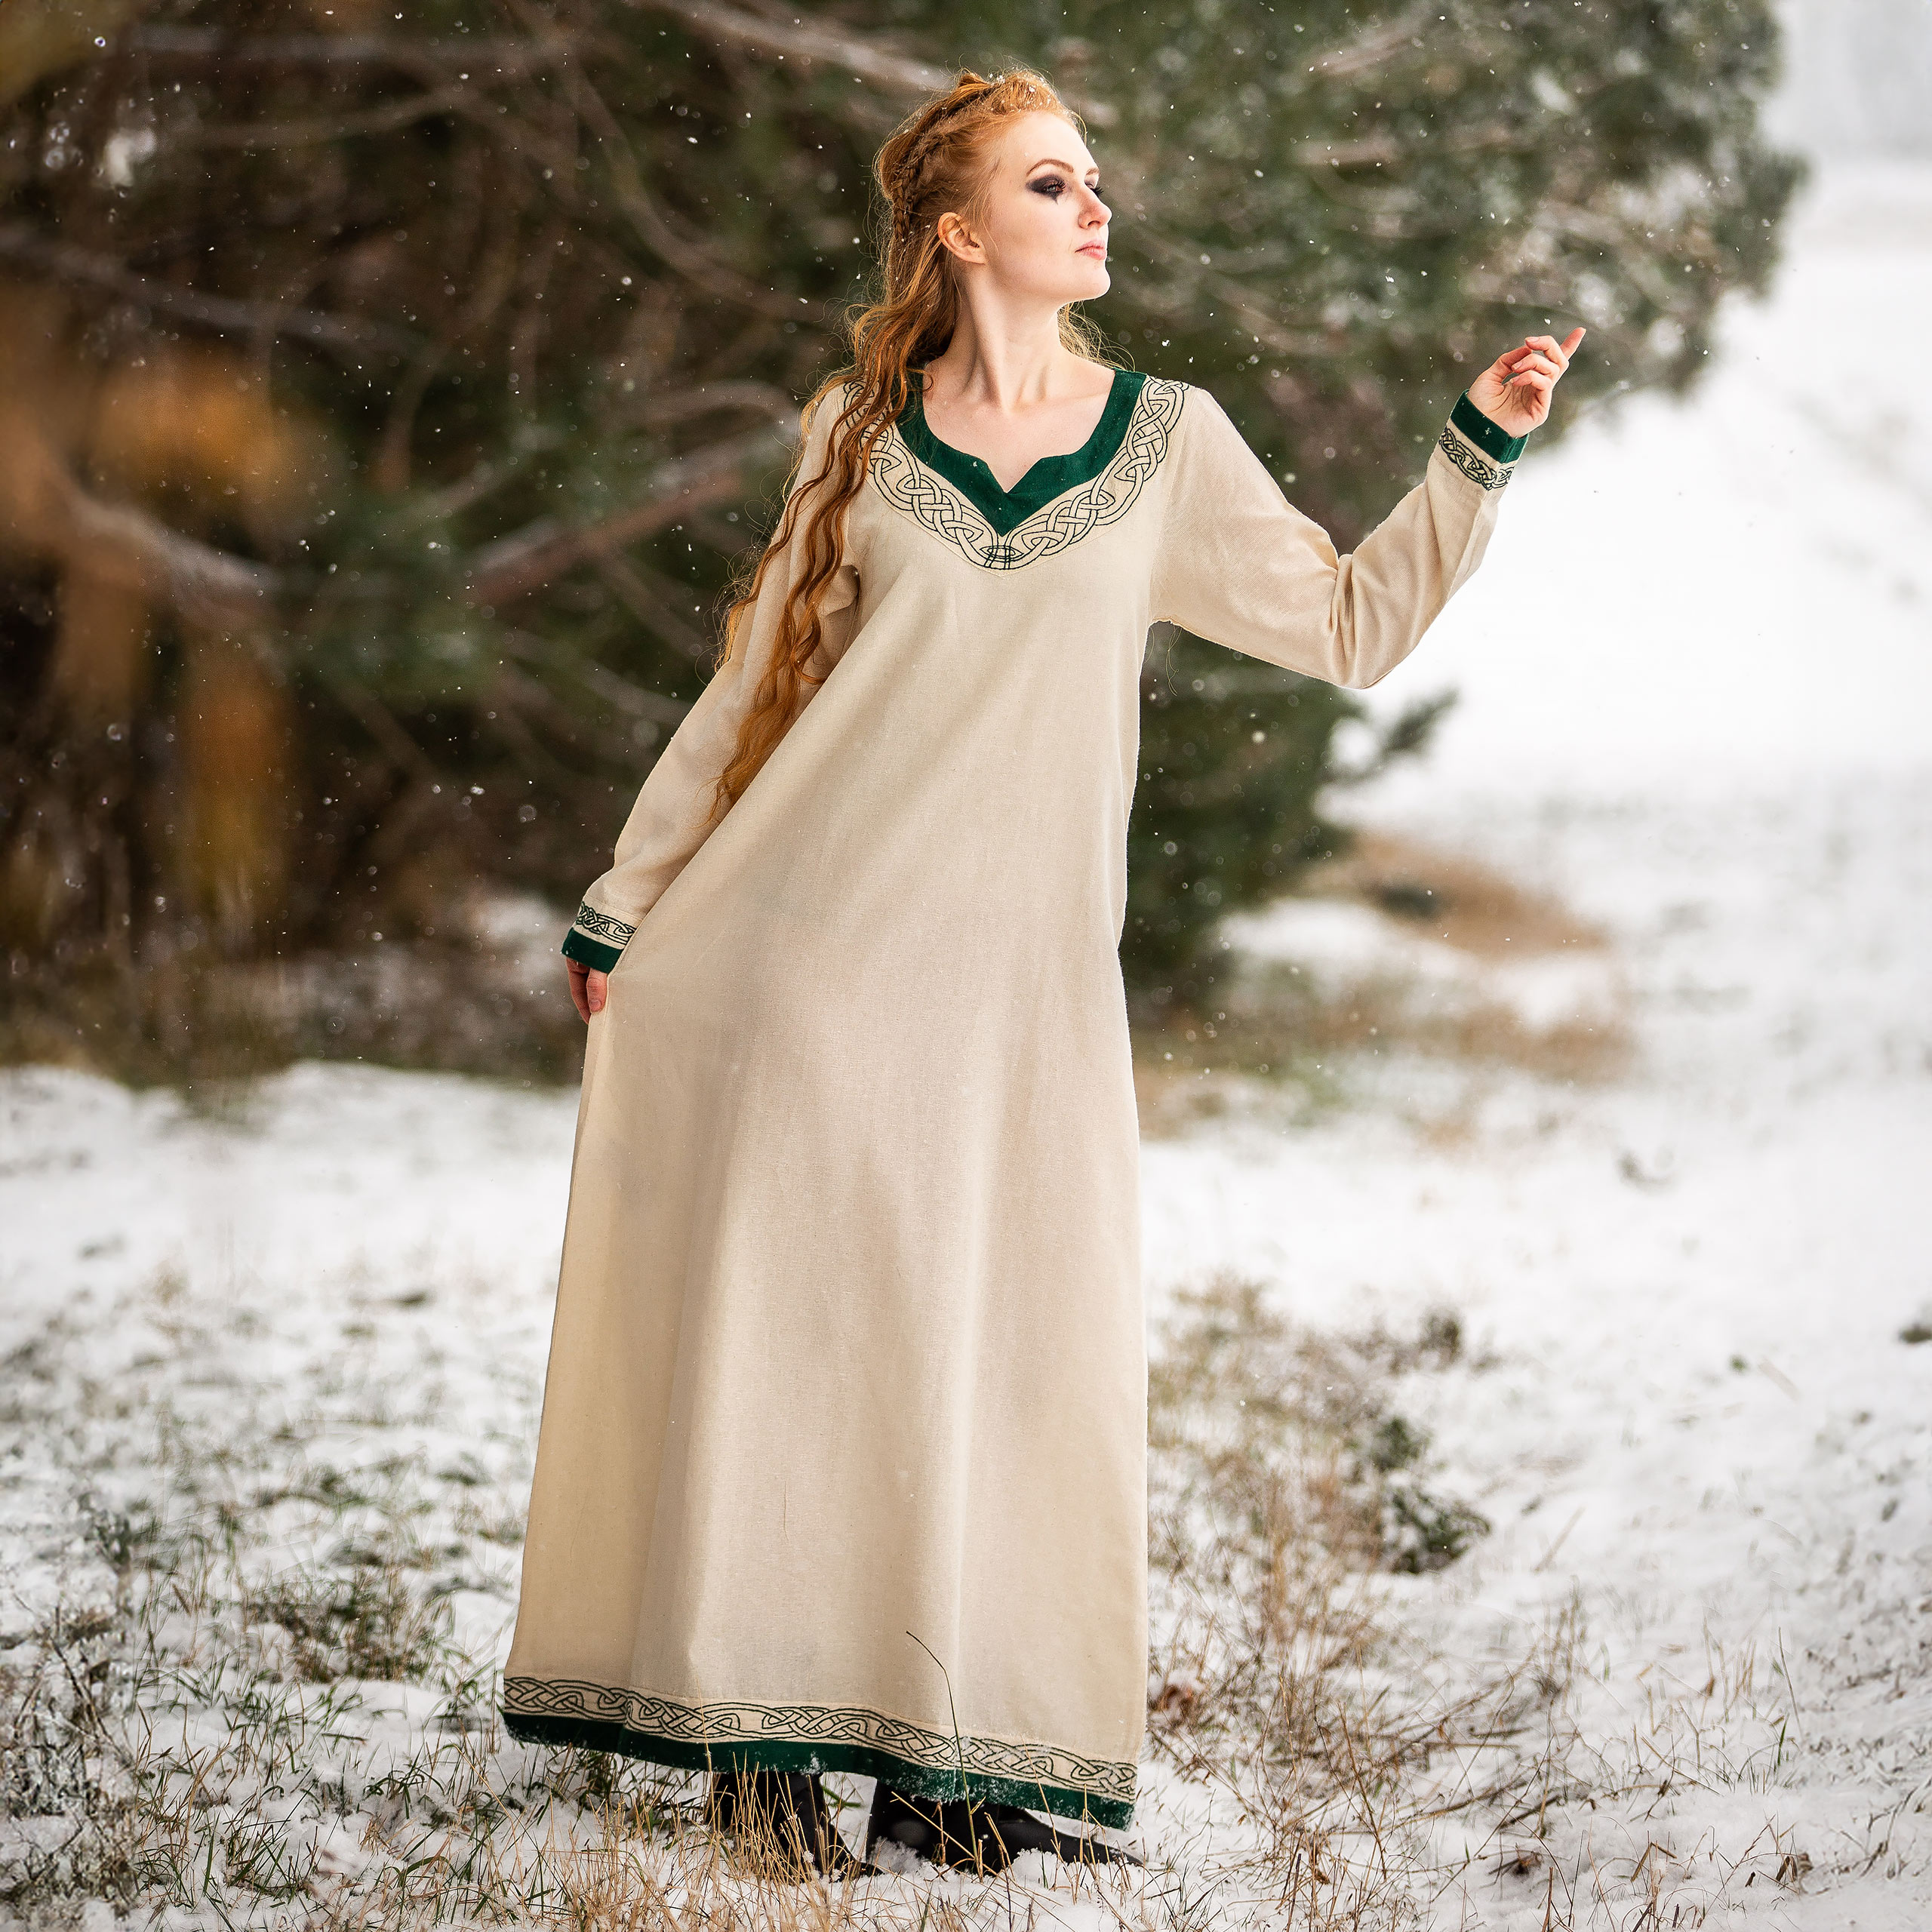 Medieval Dress with Embroidery Beige-Green